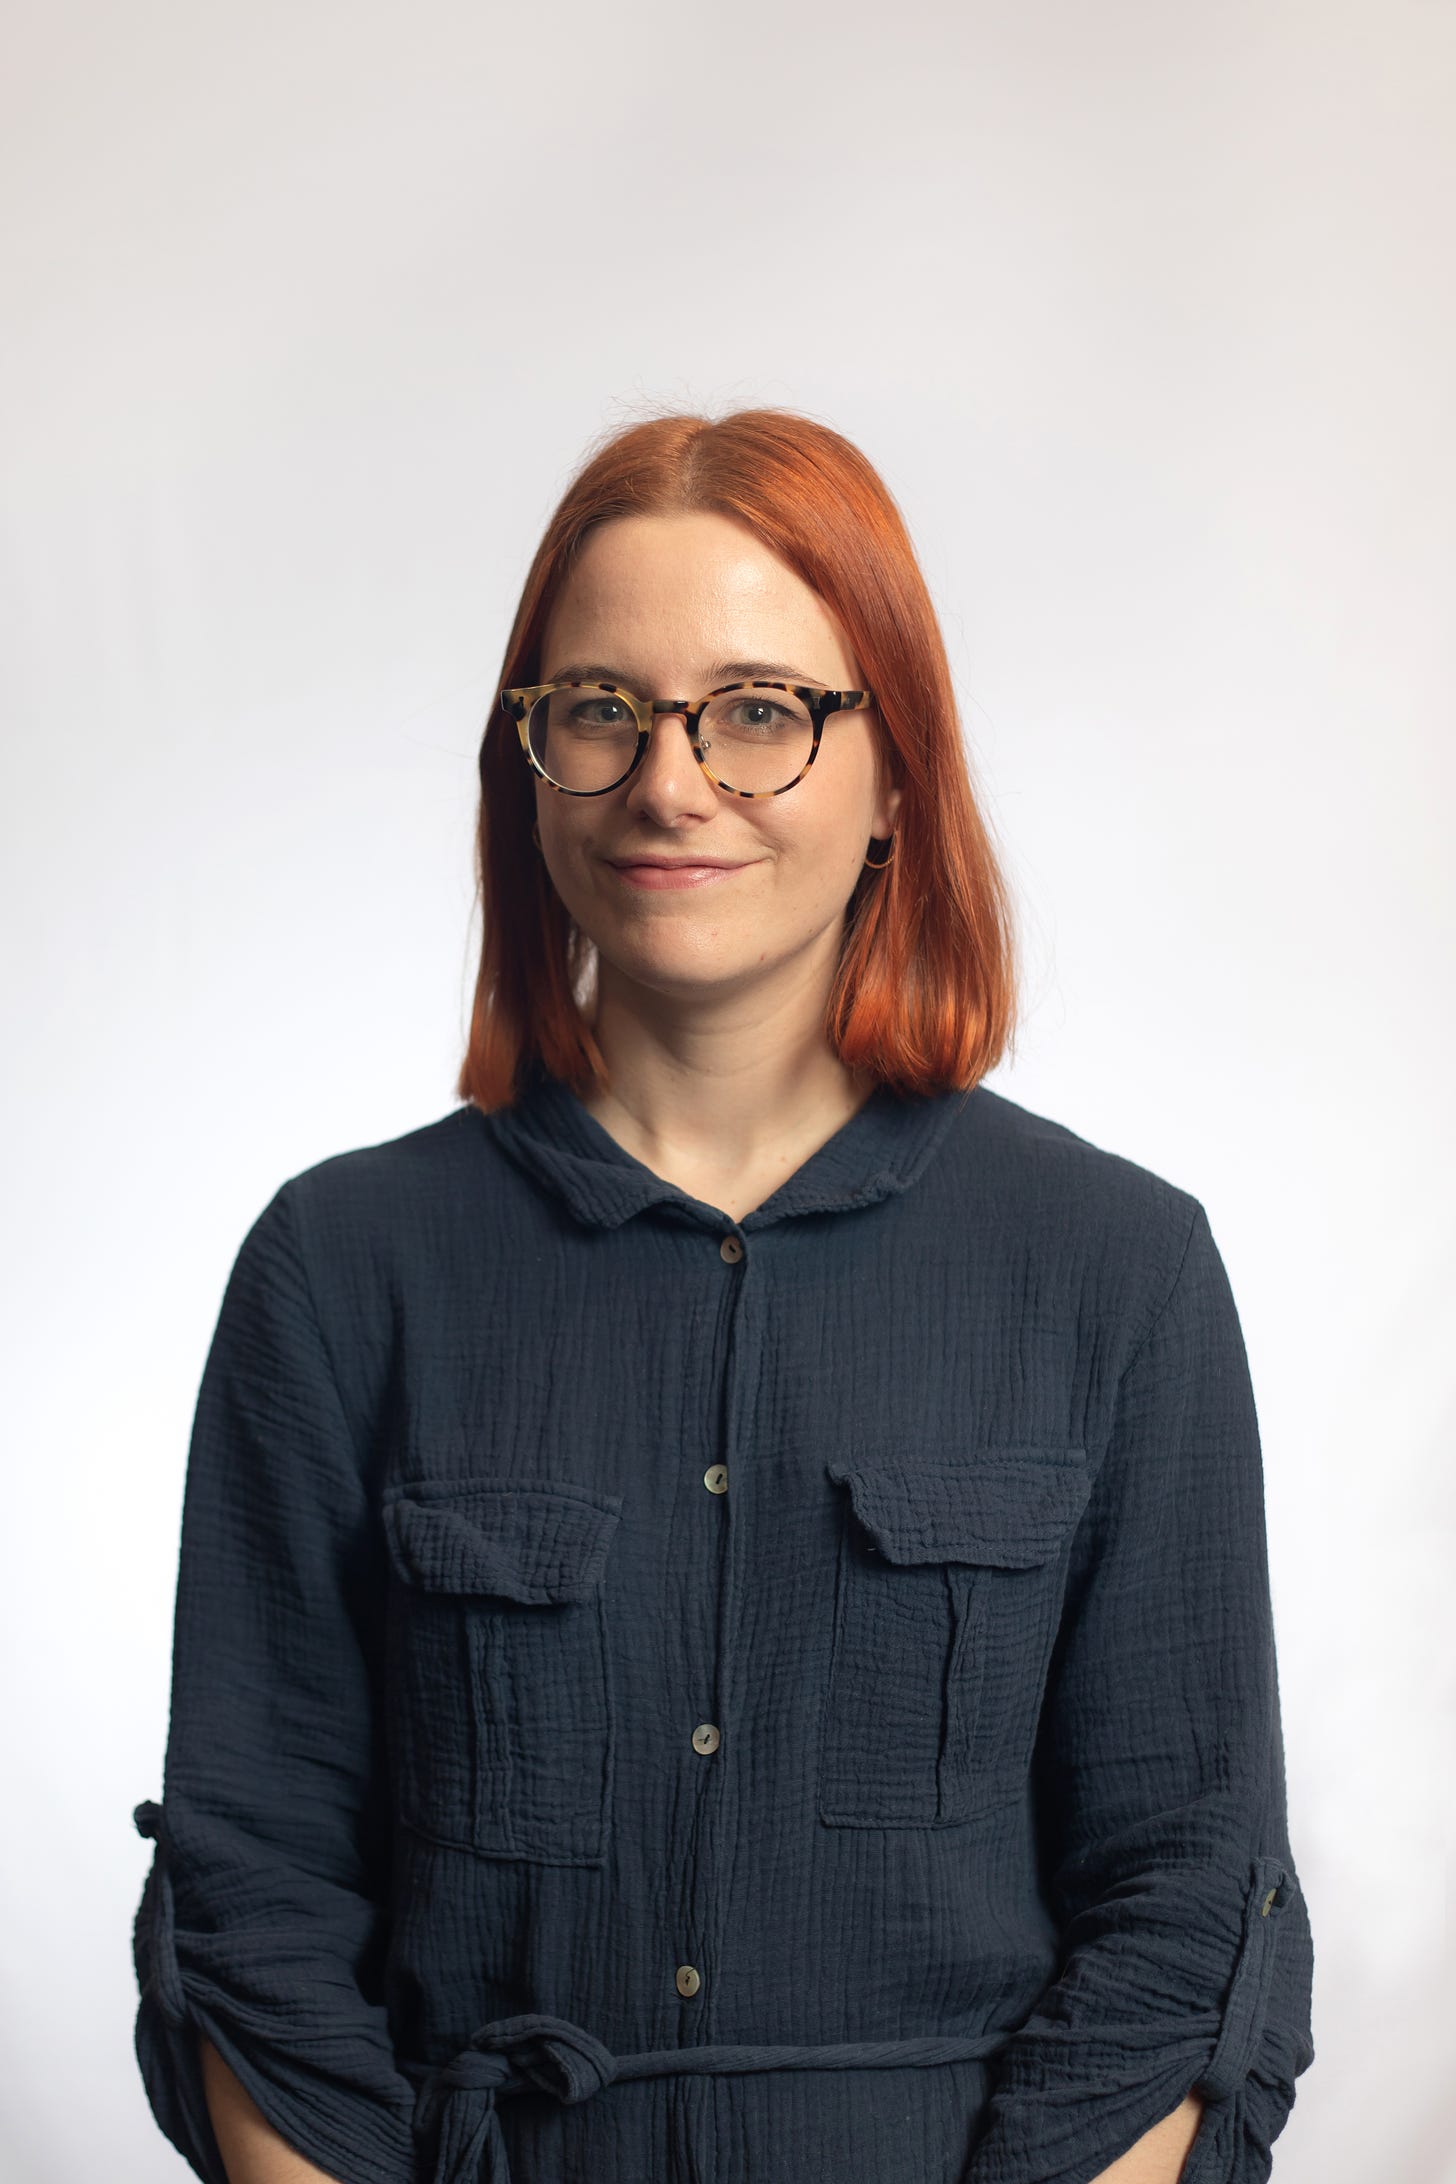 Victoria has fair skin and straight copper-red hair. She's wearing large round tortoise glasses and a petrol blue linen shirt dress. She's smiling with her mouth closed and staring straight into the camera.